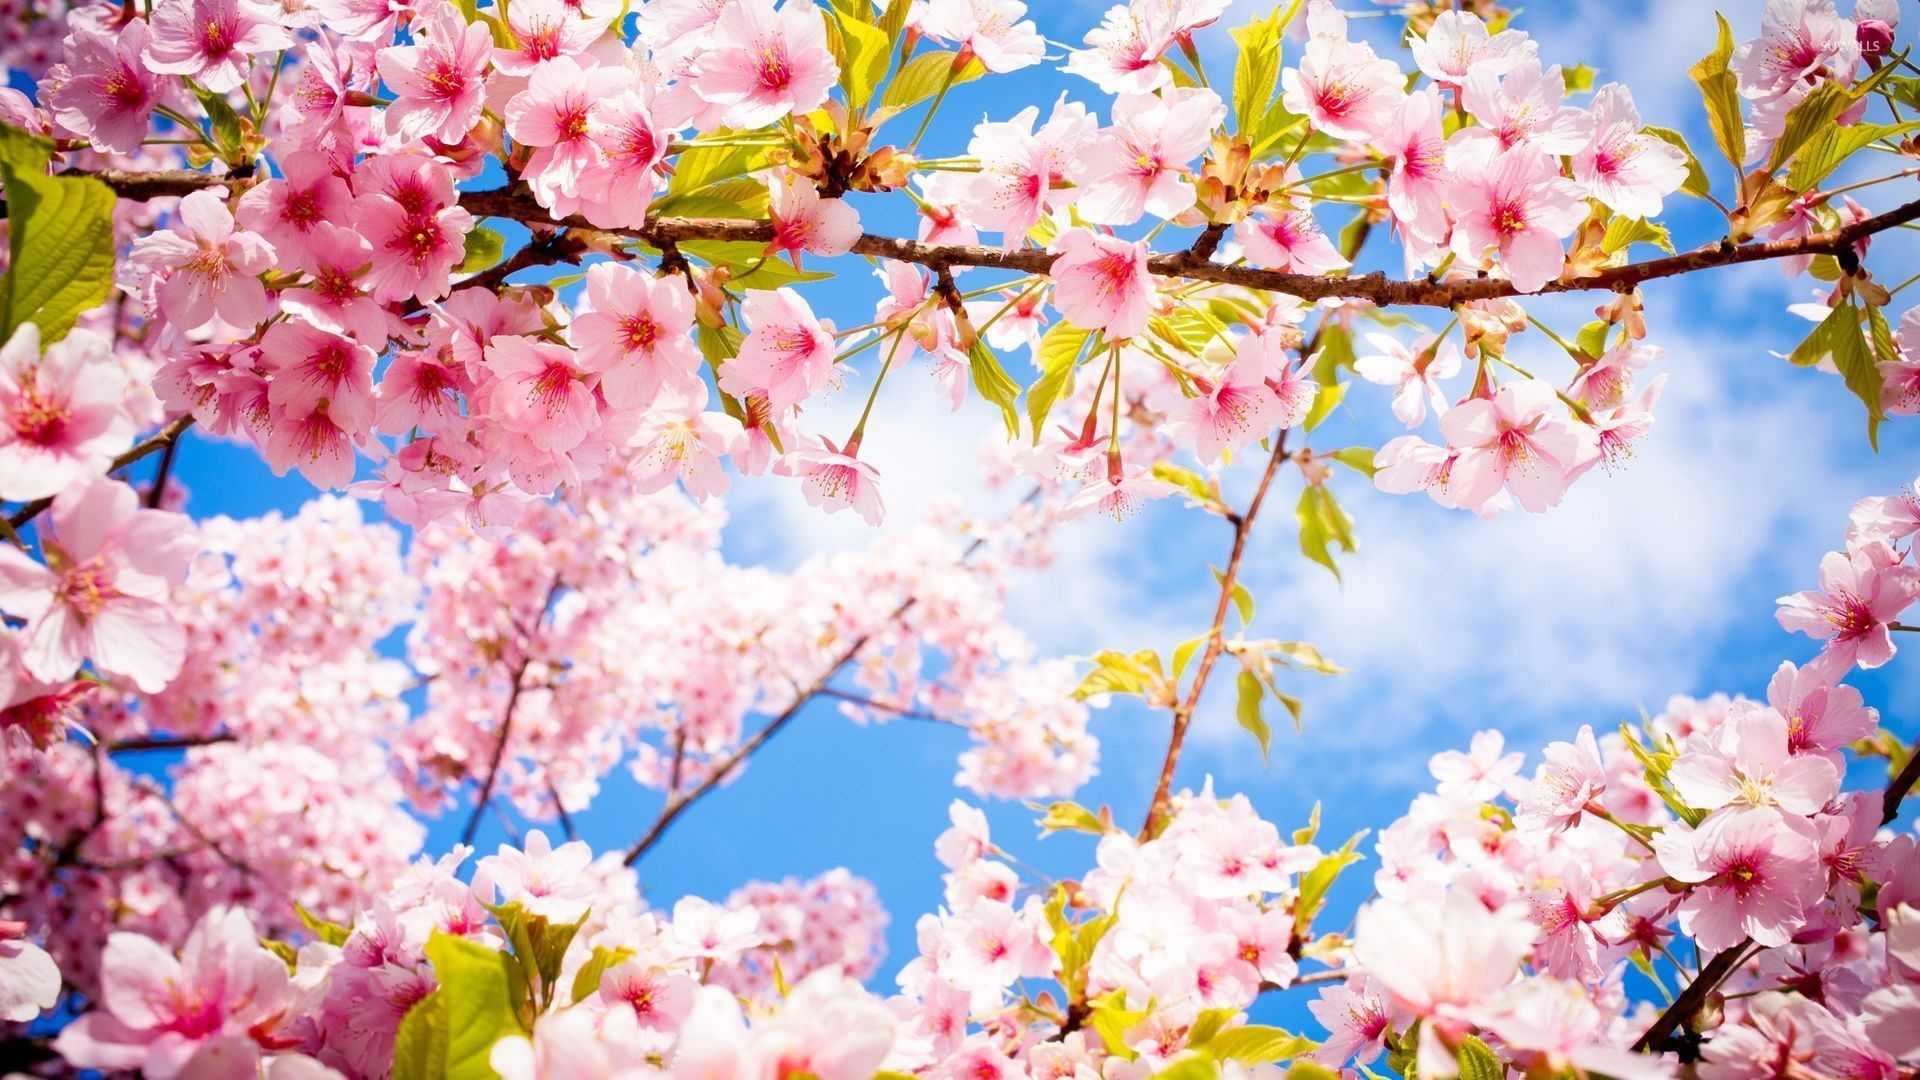 1920x1080 Pink blossoms in the spring wallpaper Â· Flowers Â· Blossom Â· ; jpg